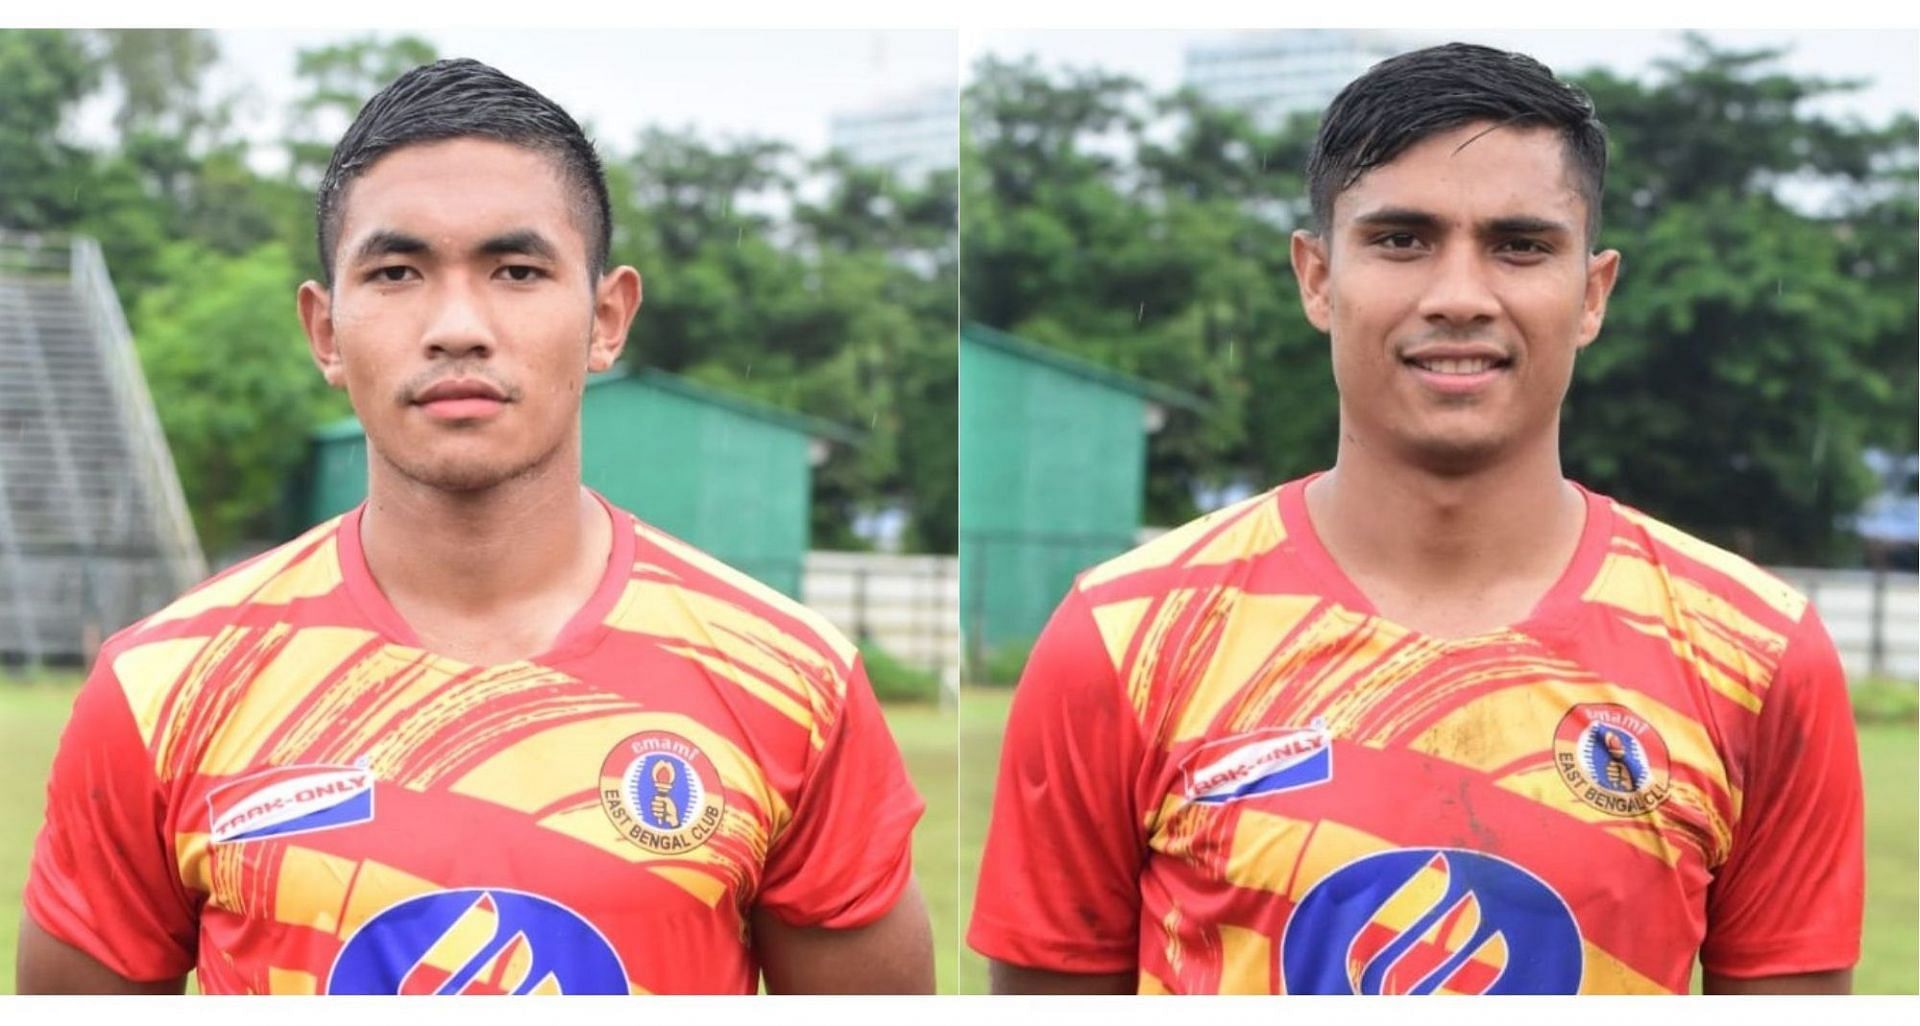 Red and Gold Brigade are moving steadily in the transfer market. (Image Courtesy: Emami East Bengal)